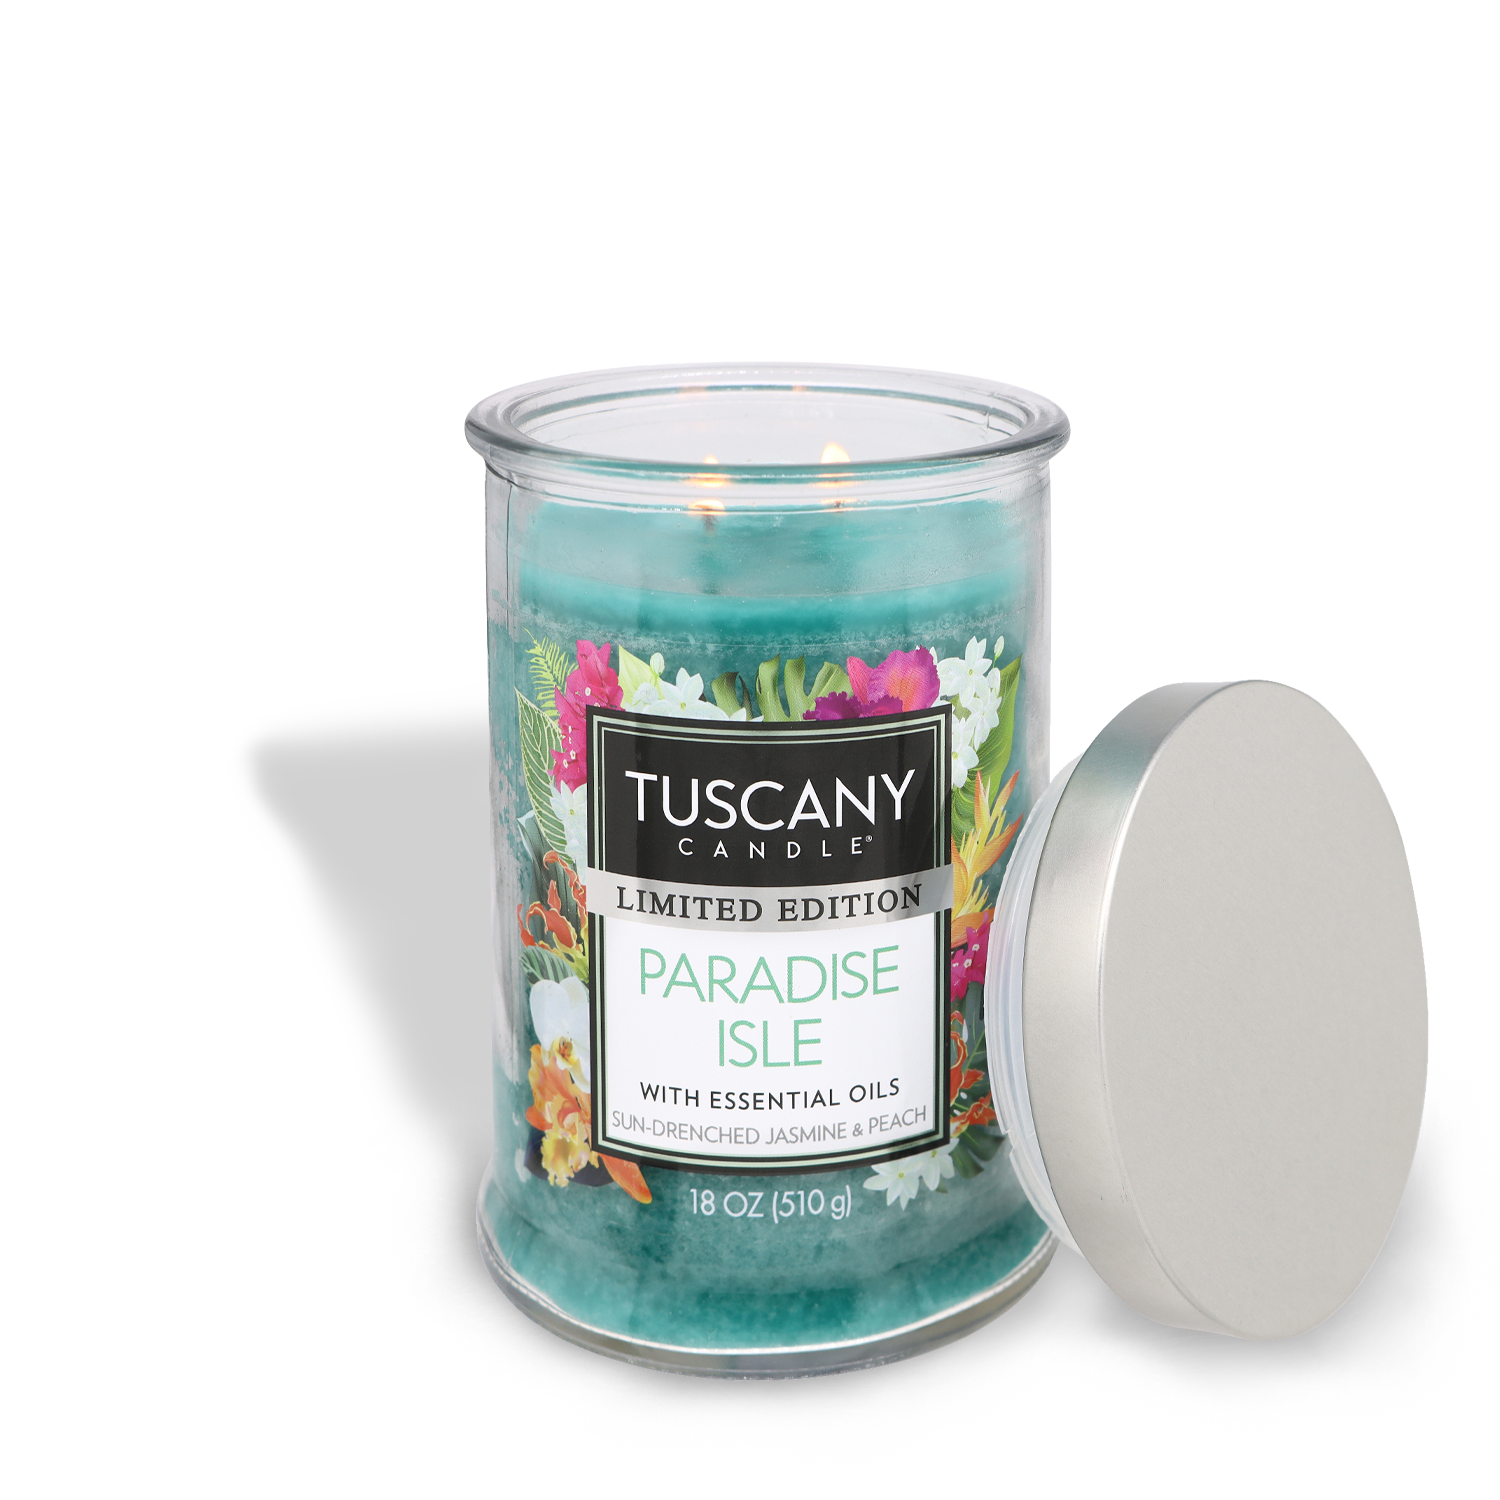 Embark on a sensory journey with our Tuscany Candle® SEASONAL Paradise Isle Long-Lasting Scented Jar Candle (18 oz), perfect for summer escapes.